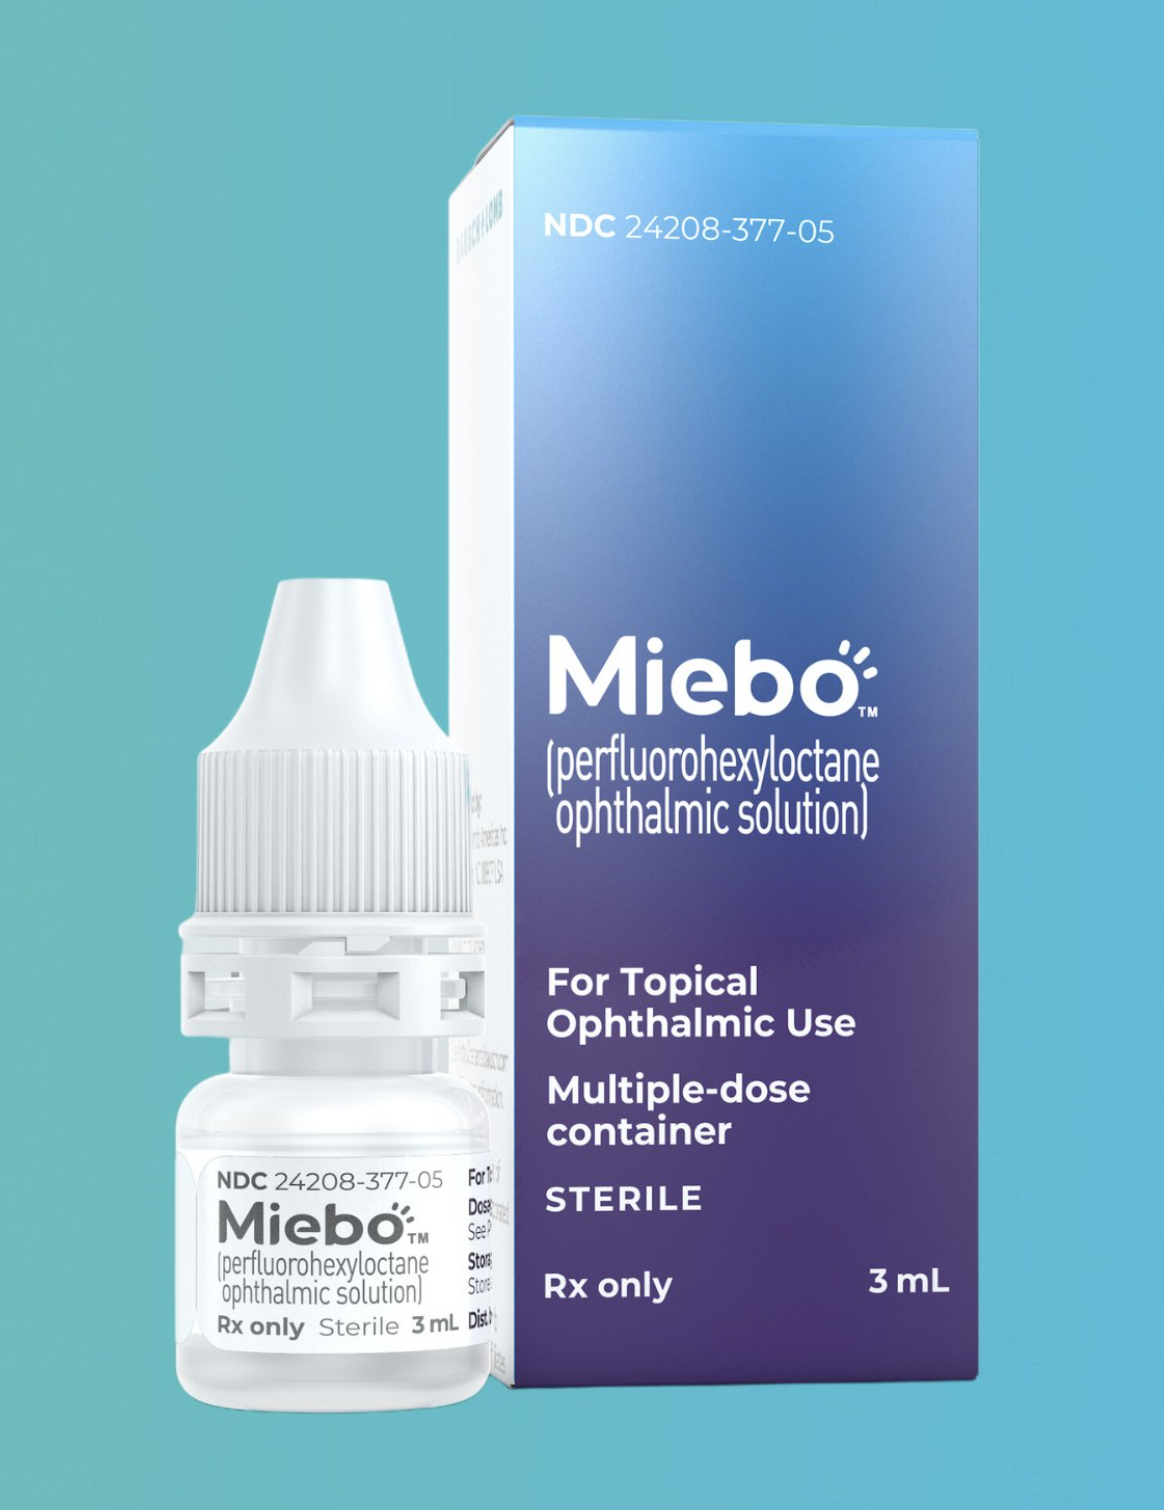 Miebo may particularly benefit those with dry eye related to MGD, as it targets tear evaporation.